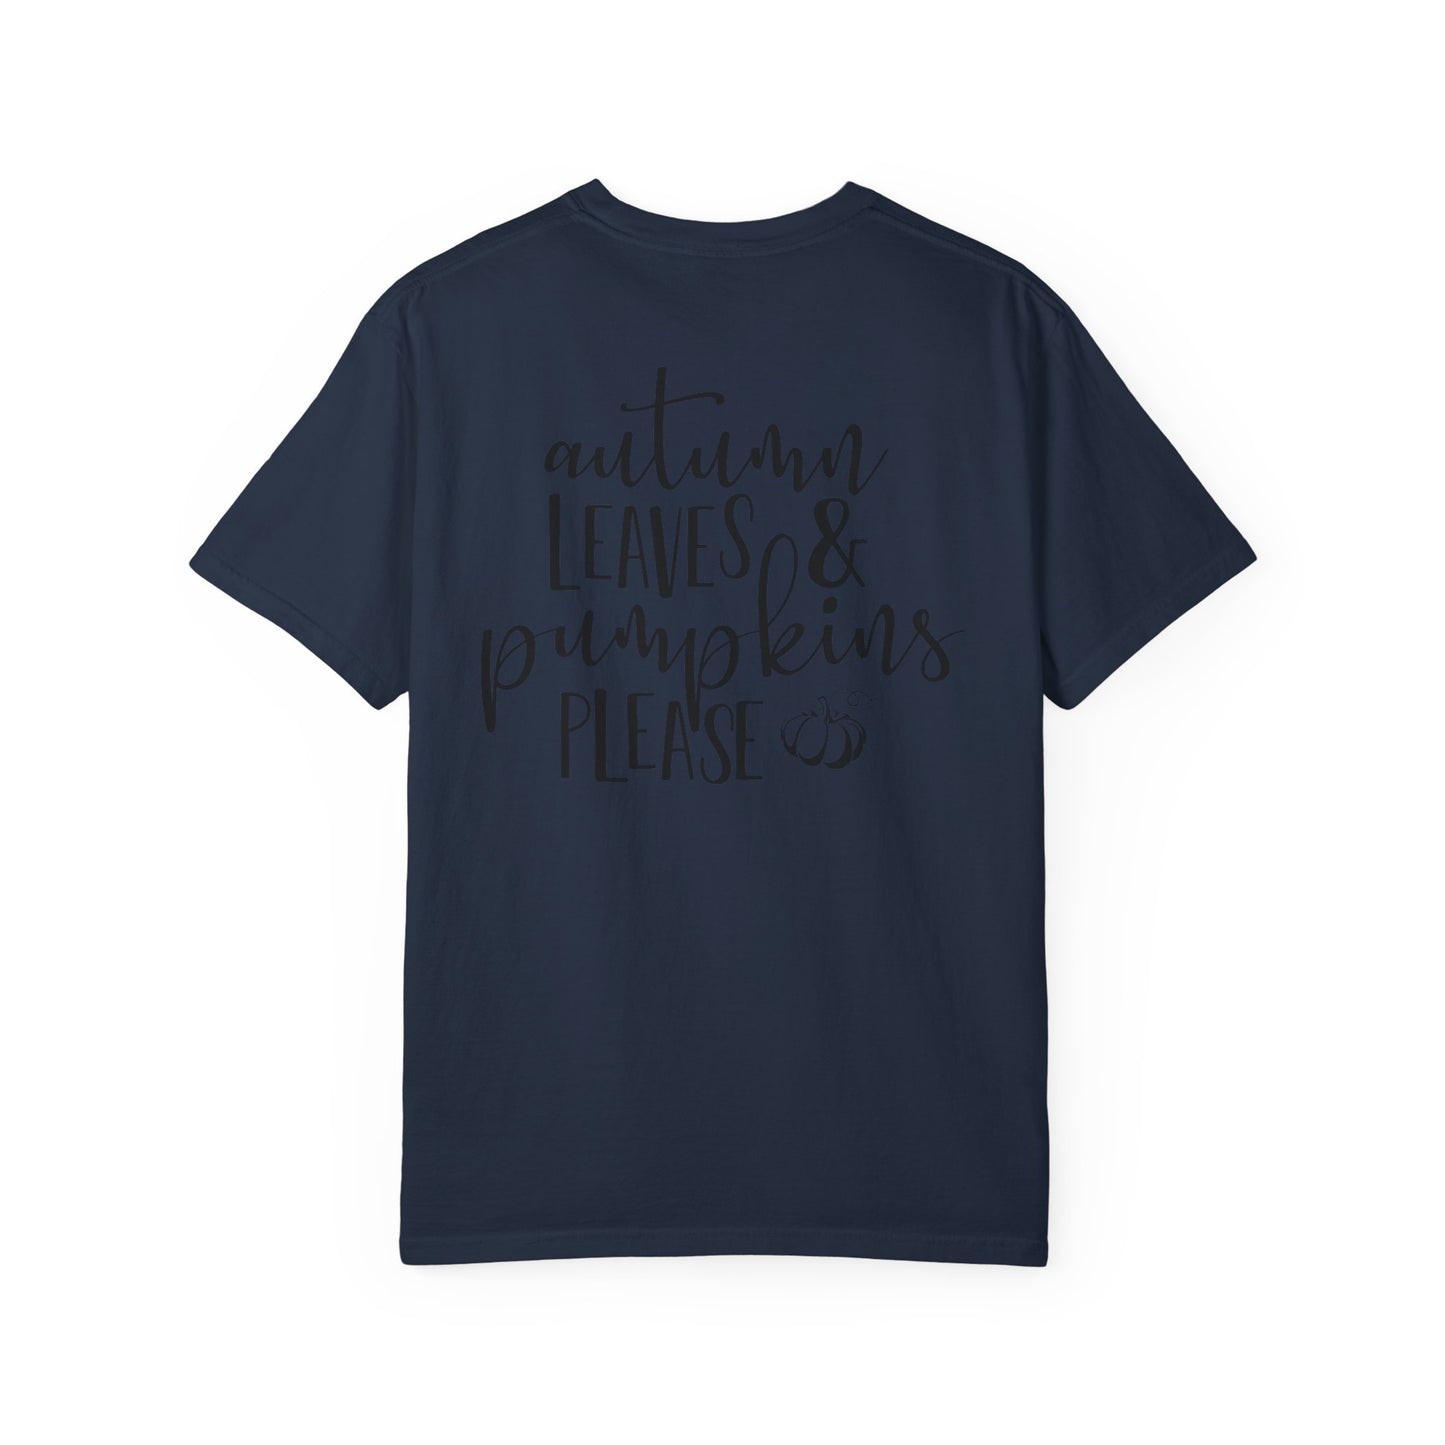 Blue Collar Boutiques Fall Tee